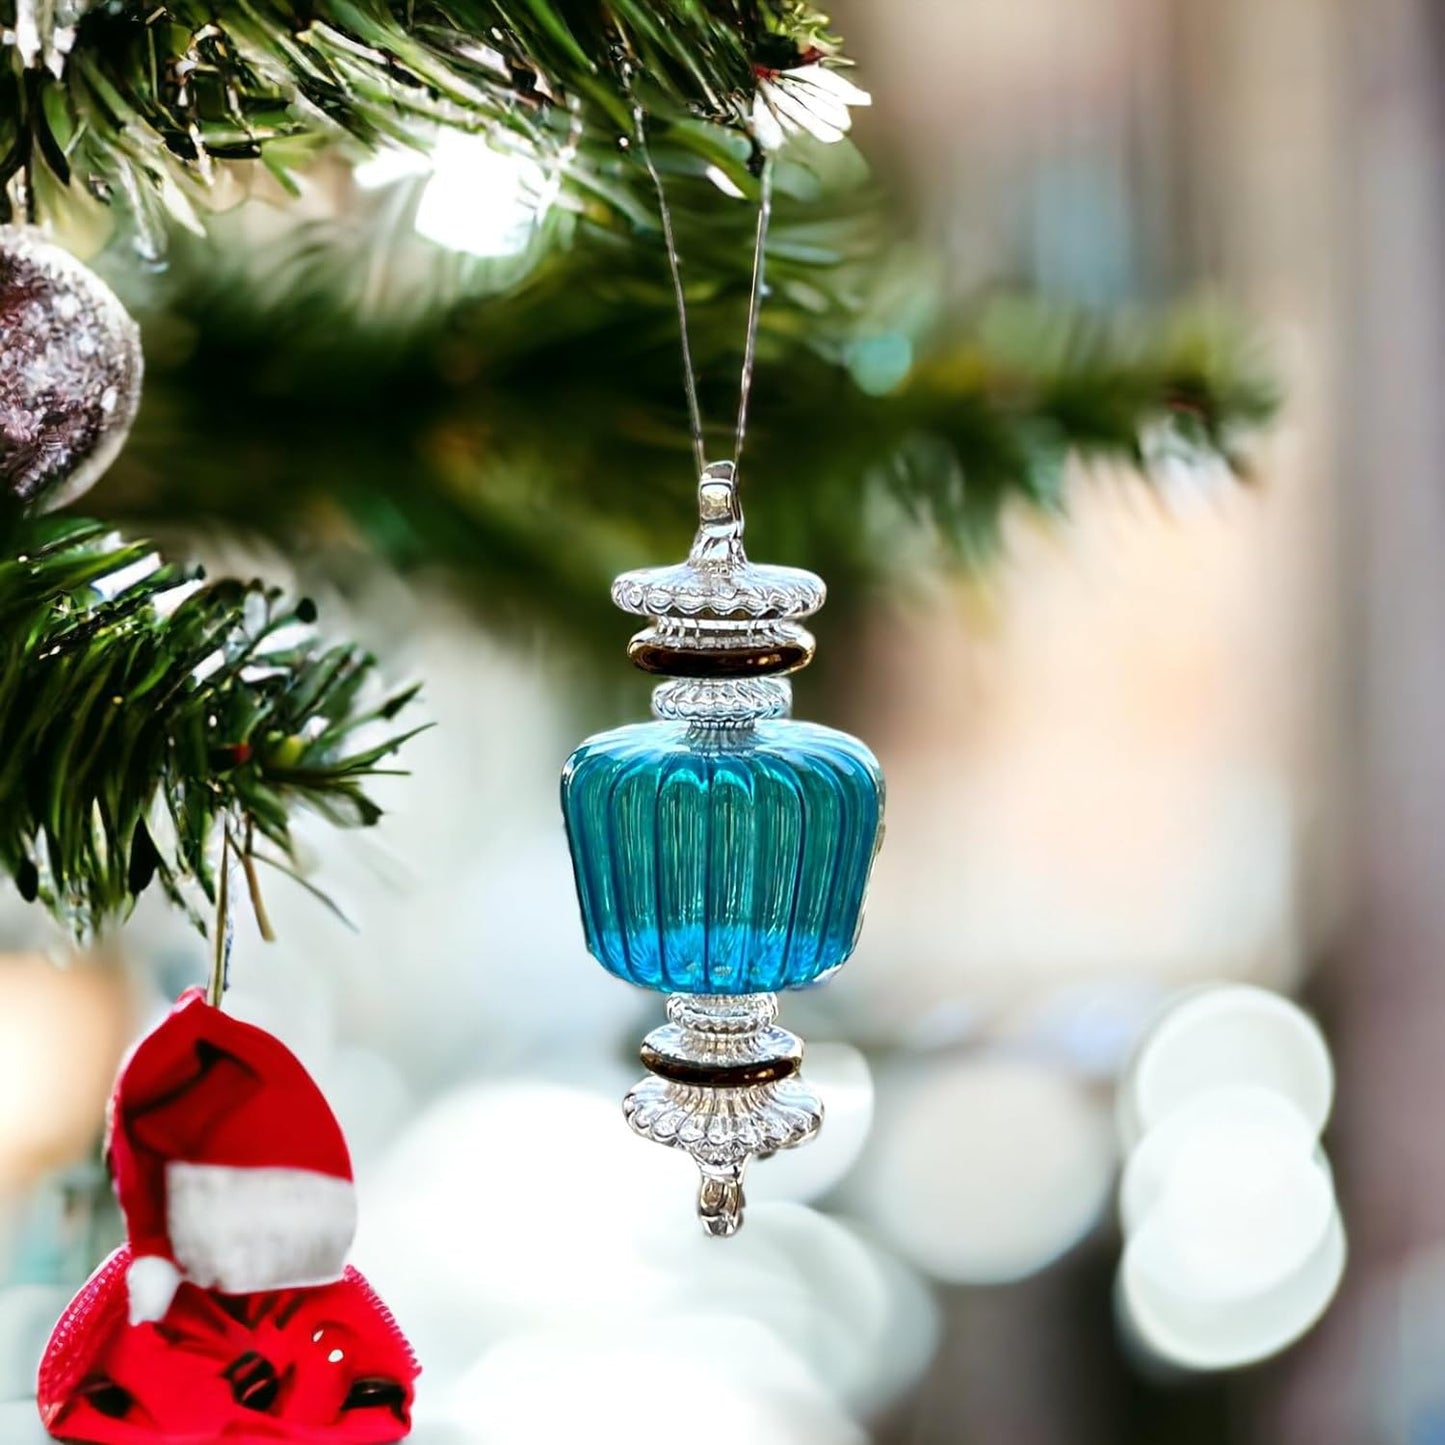 Turquoise Bell Ornament - Les Trois Pyramides